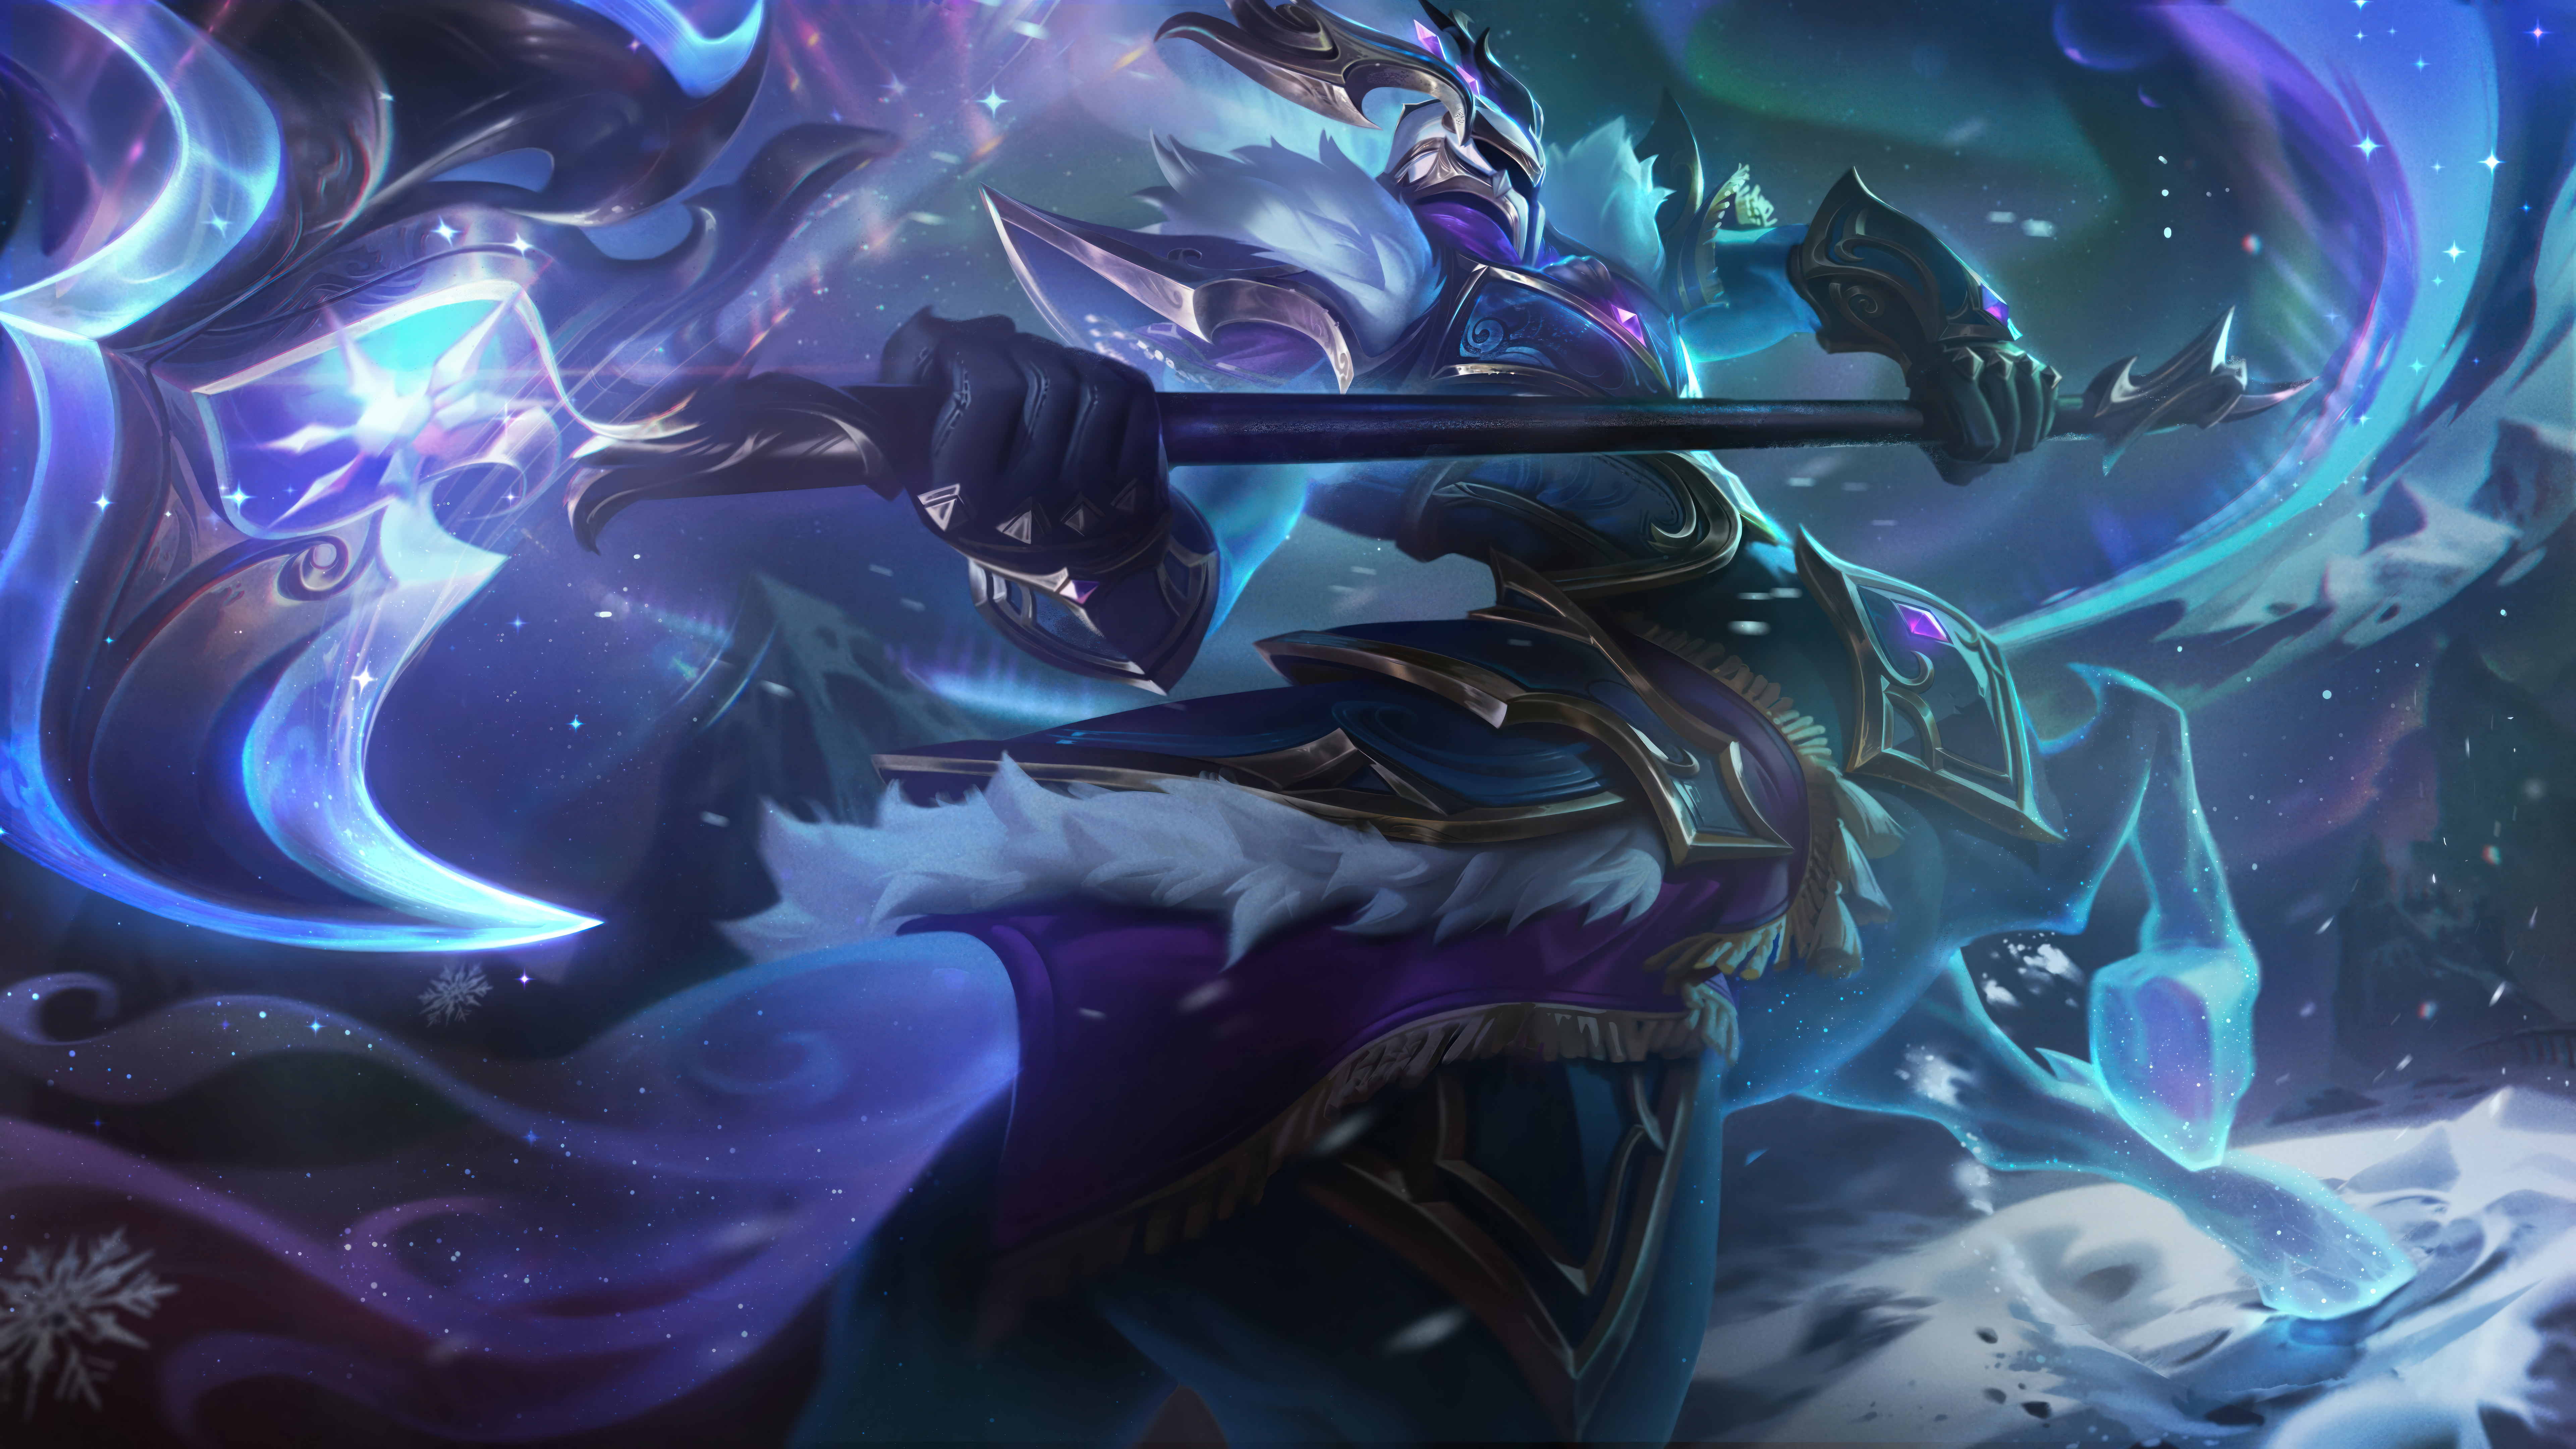 General 7680x4320 Hecarim (League of Legends) video games Riot Games digital art Winterblessed (League of Legends) League of Legends GZG video game characters 4K video game art aurorae video game men snow armor scythe night Centaurs snowflakes